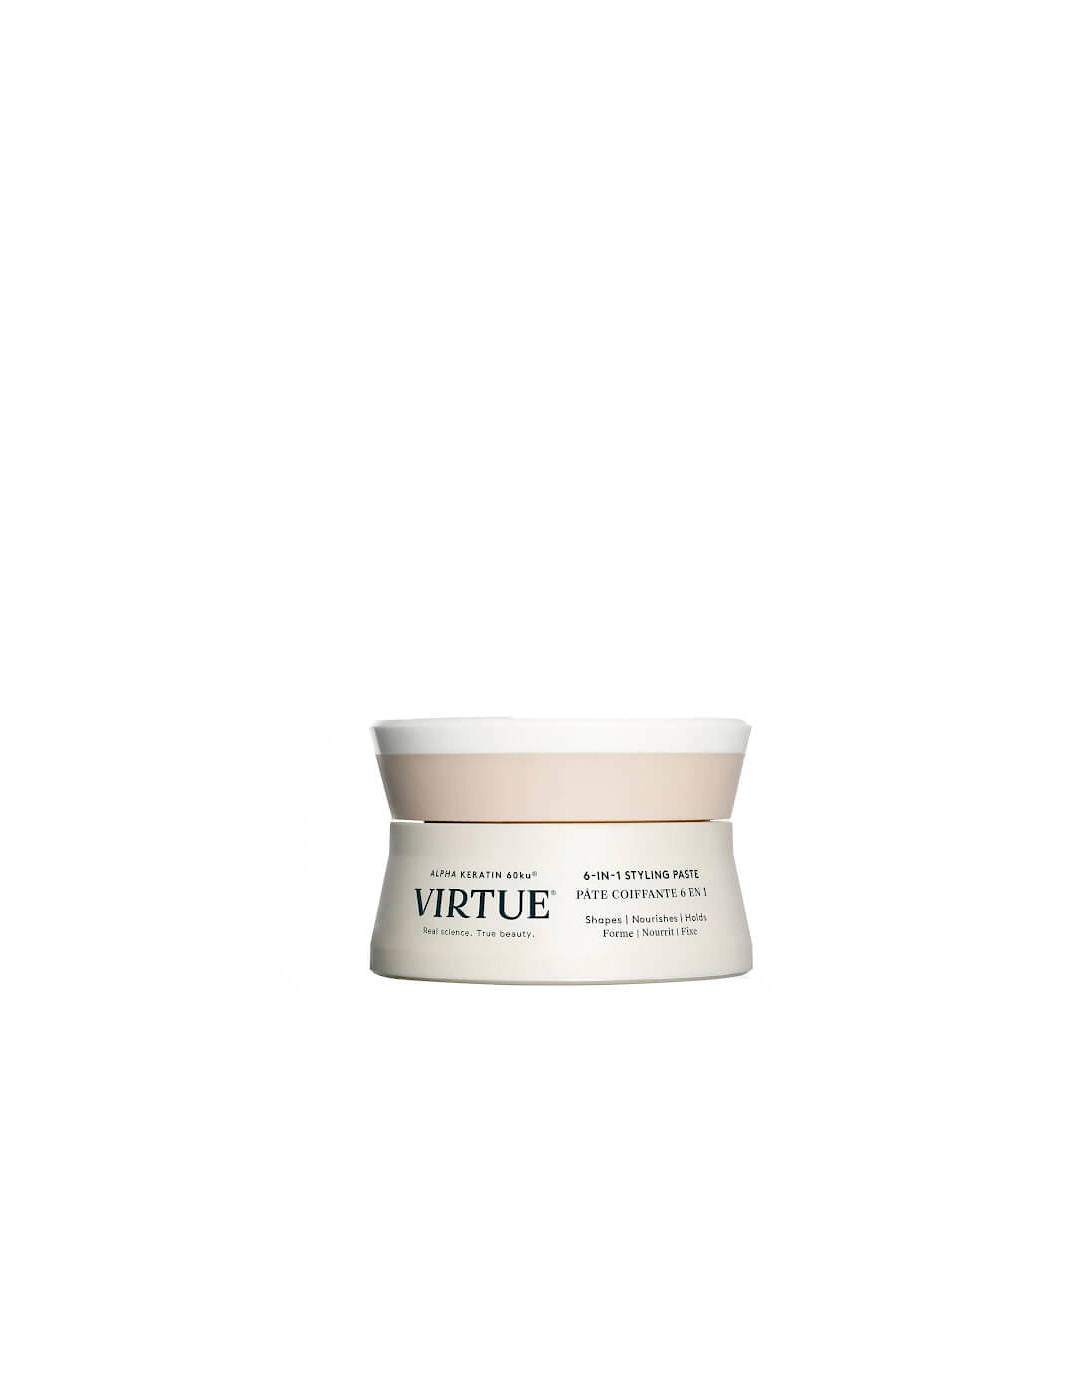 6-in-1 Styling Paste 50ml - VIRTUE, 2 of 1